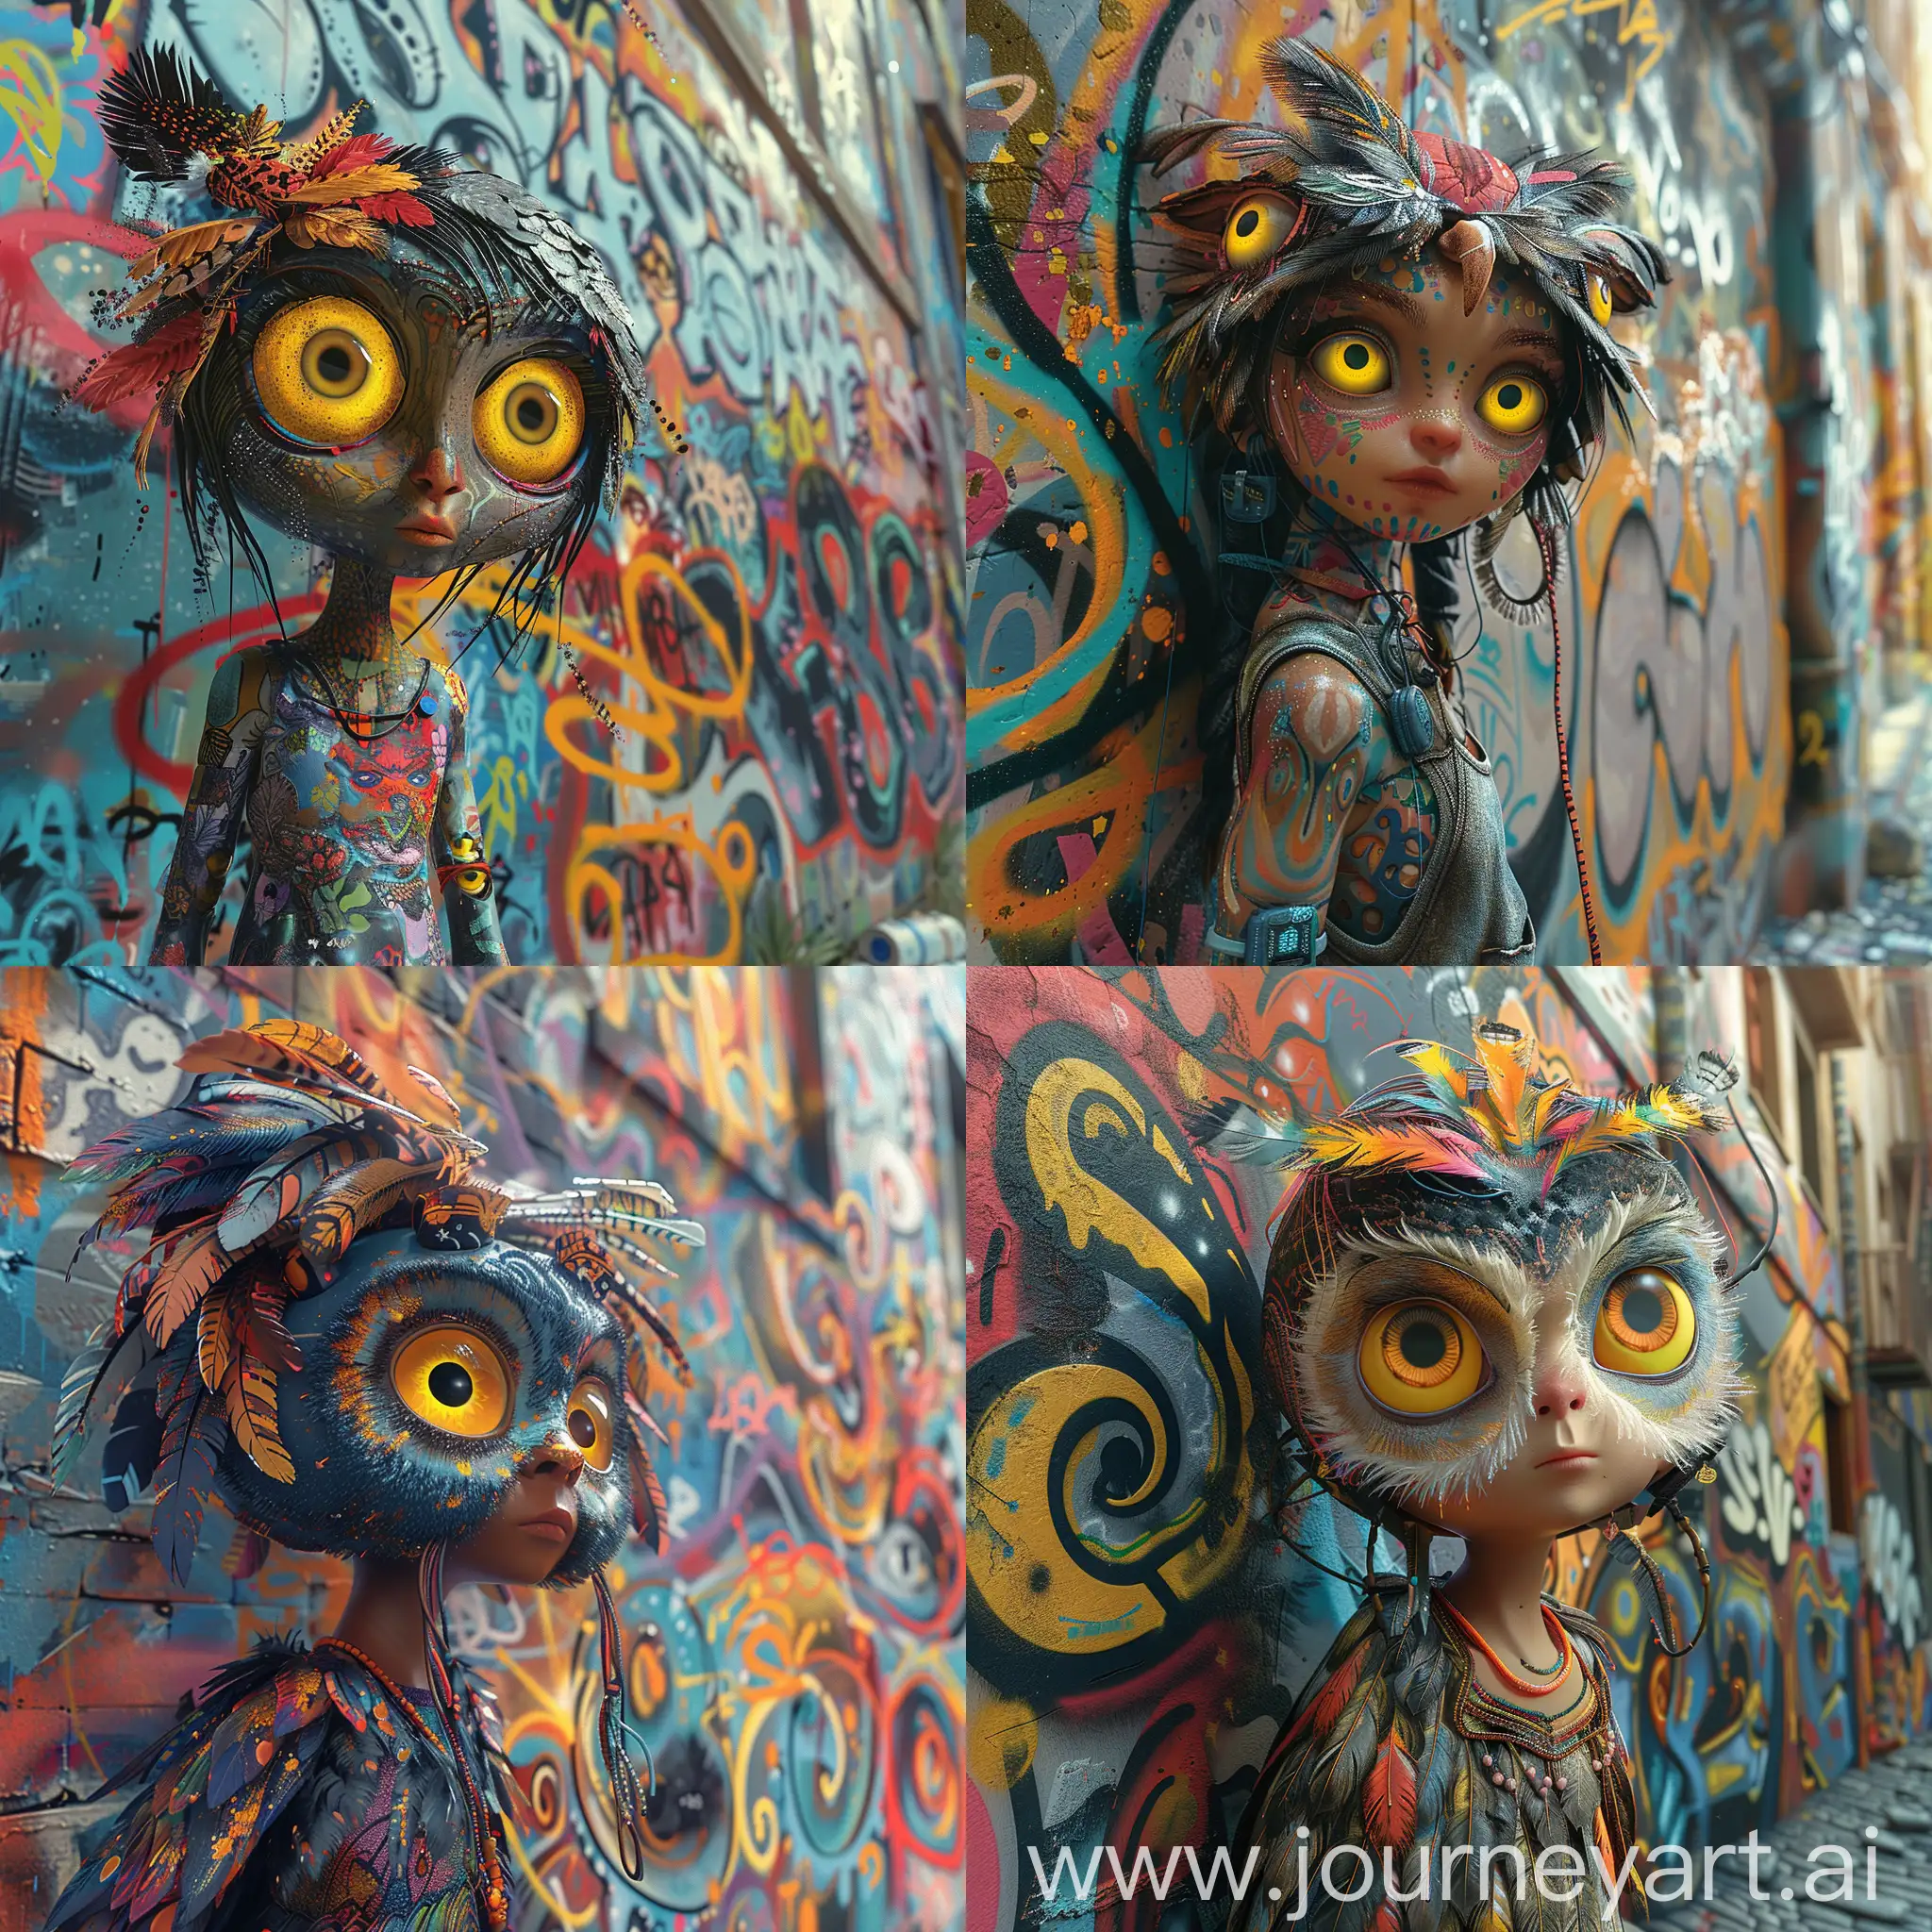 A stunning 3D render of a young girl with the upper body of an owl, standing against a vibrant city wall covered in graffiti. The girl-owl character has bright yellow eyes and wears a colorful, feathered headdress. The graffiti around her features swirling patterns and abstract shapes, creating a dynamic urban backdrop. The overall feel of the image is energetic and vibrant, with a touch of fantasy and street art., 3d render, graffiti --style raw --stylize 750